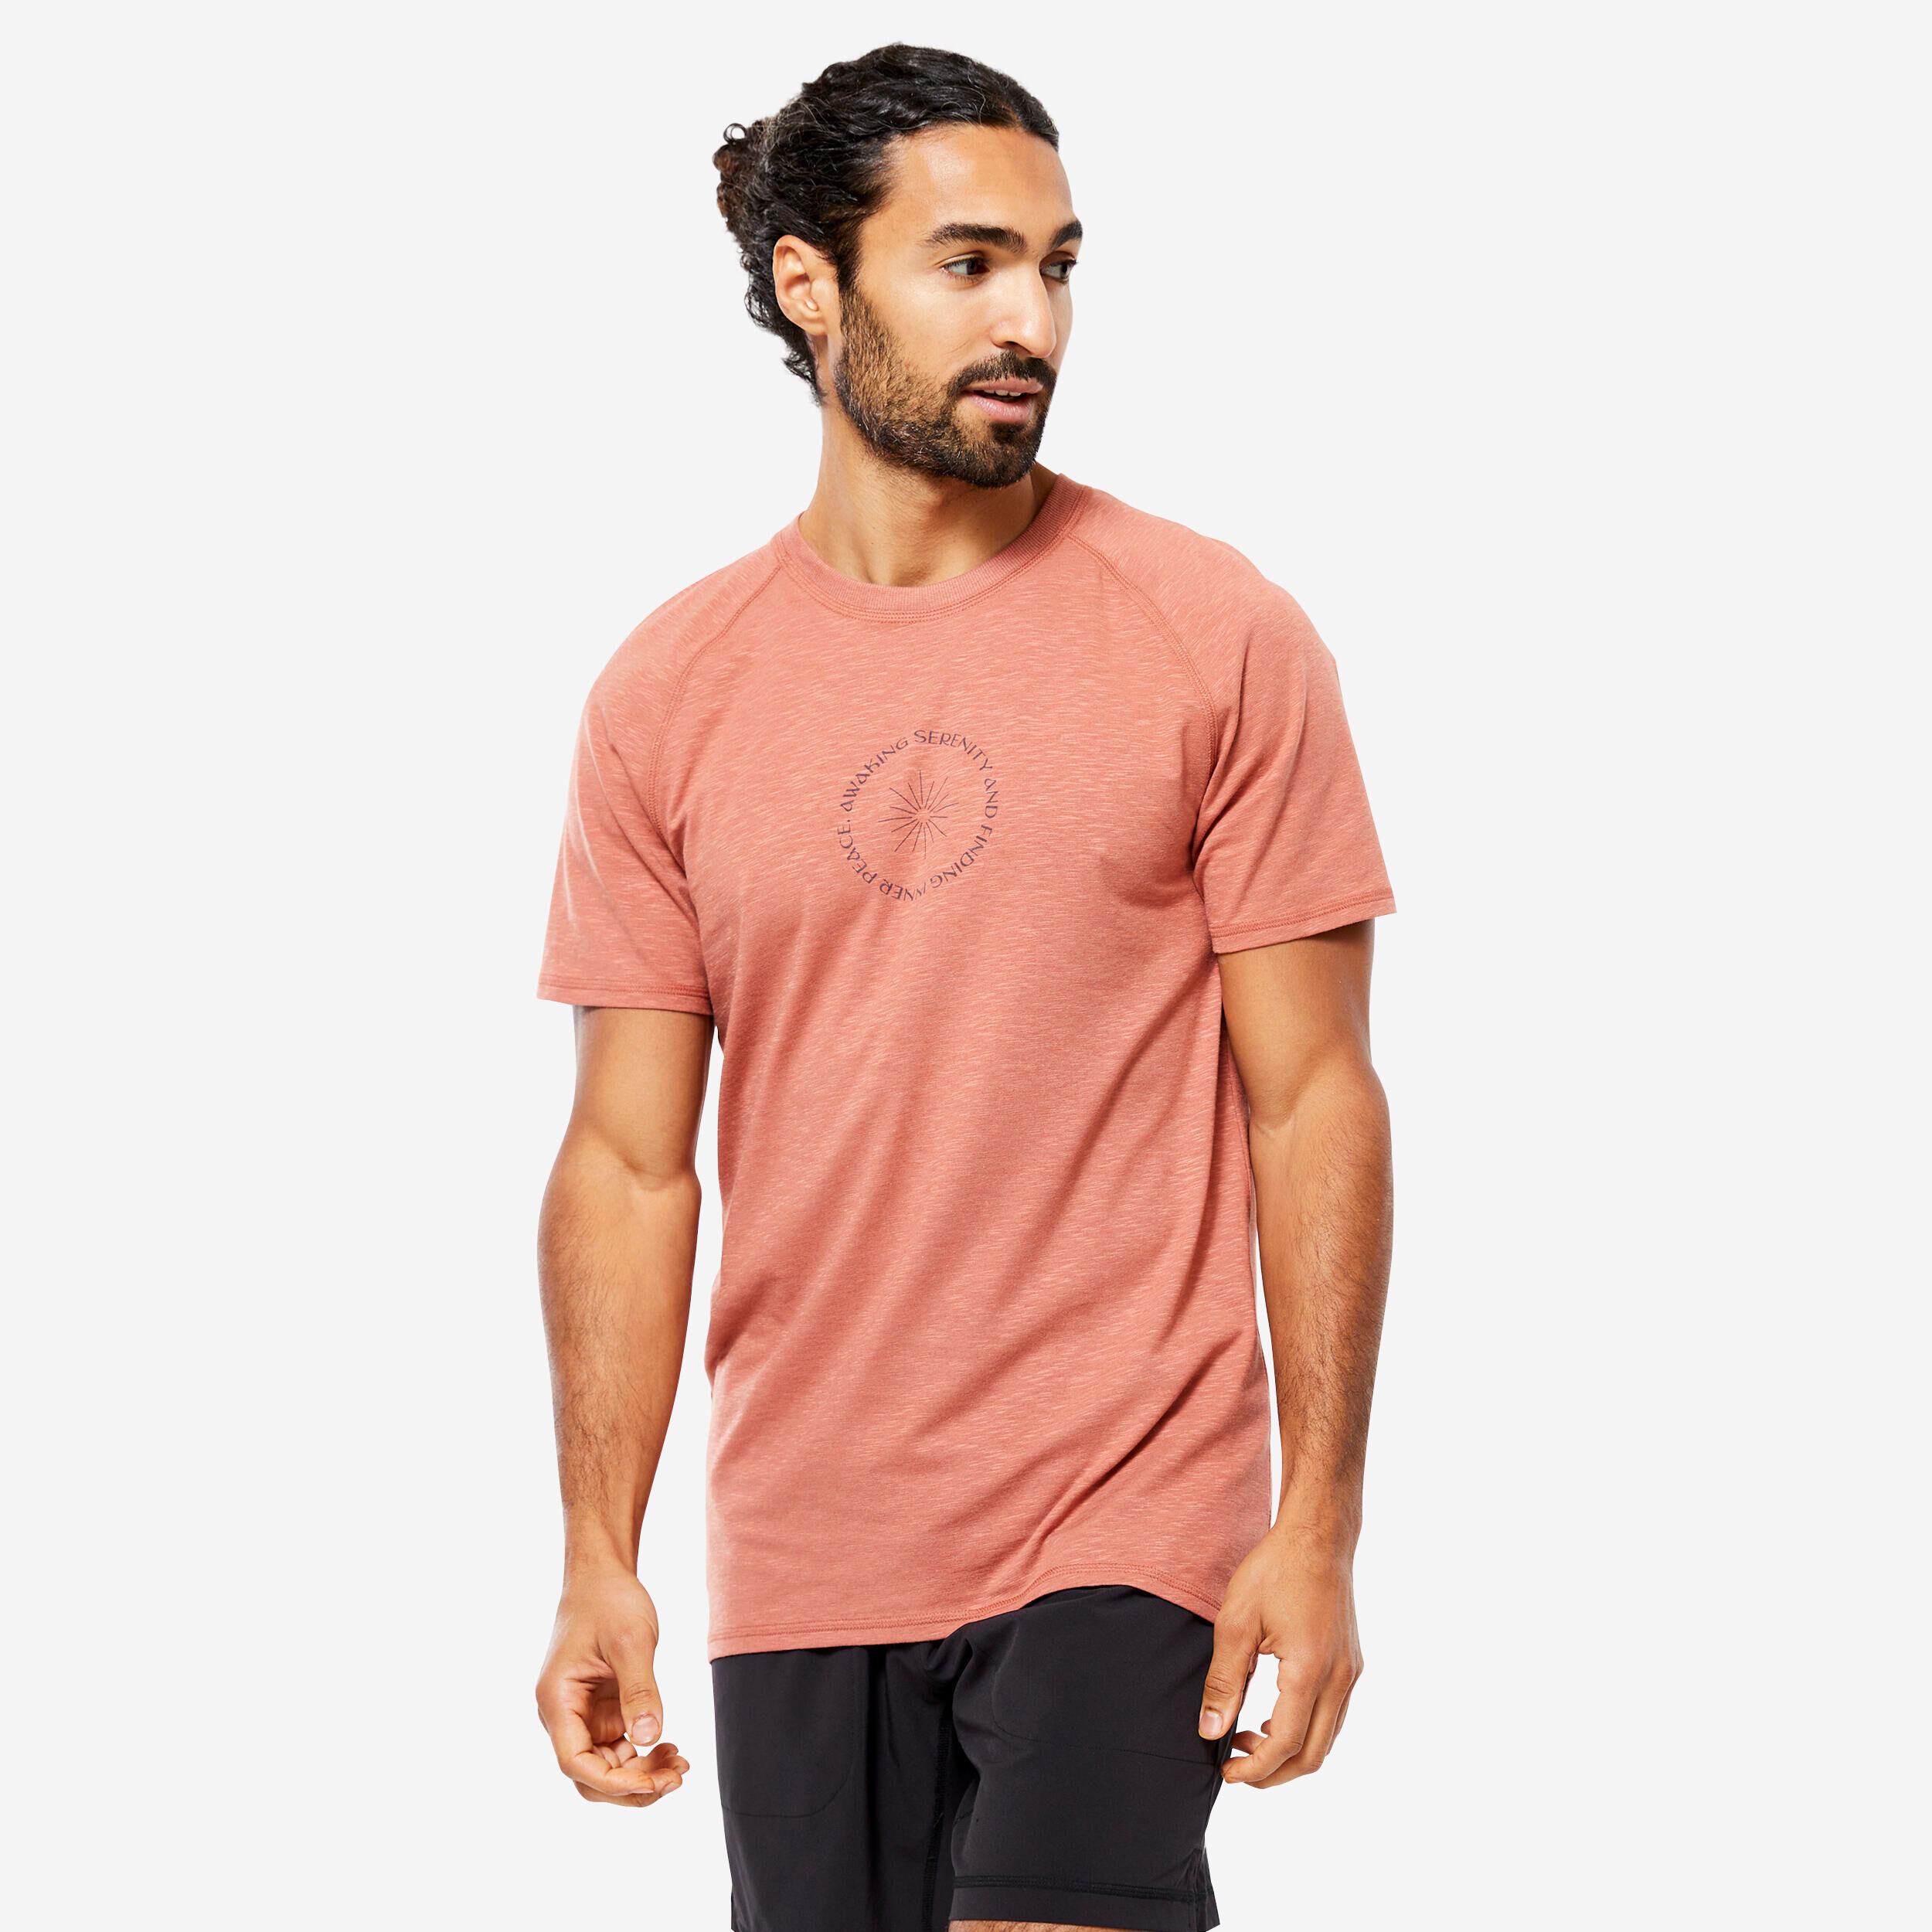 KIMJALY Men's Short-Sleeved Gentle Yoga T-Shirt in Natural Fabric - Terracotta